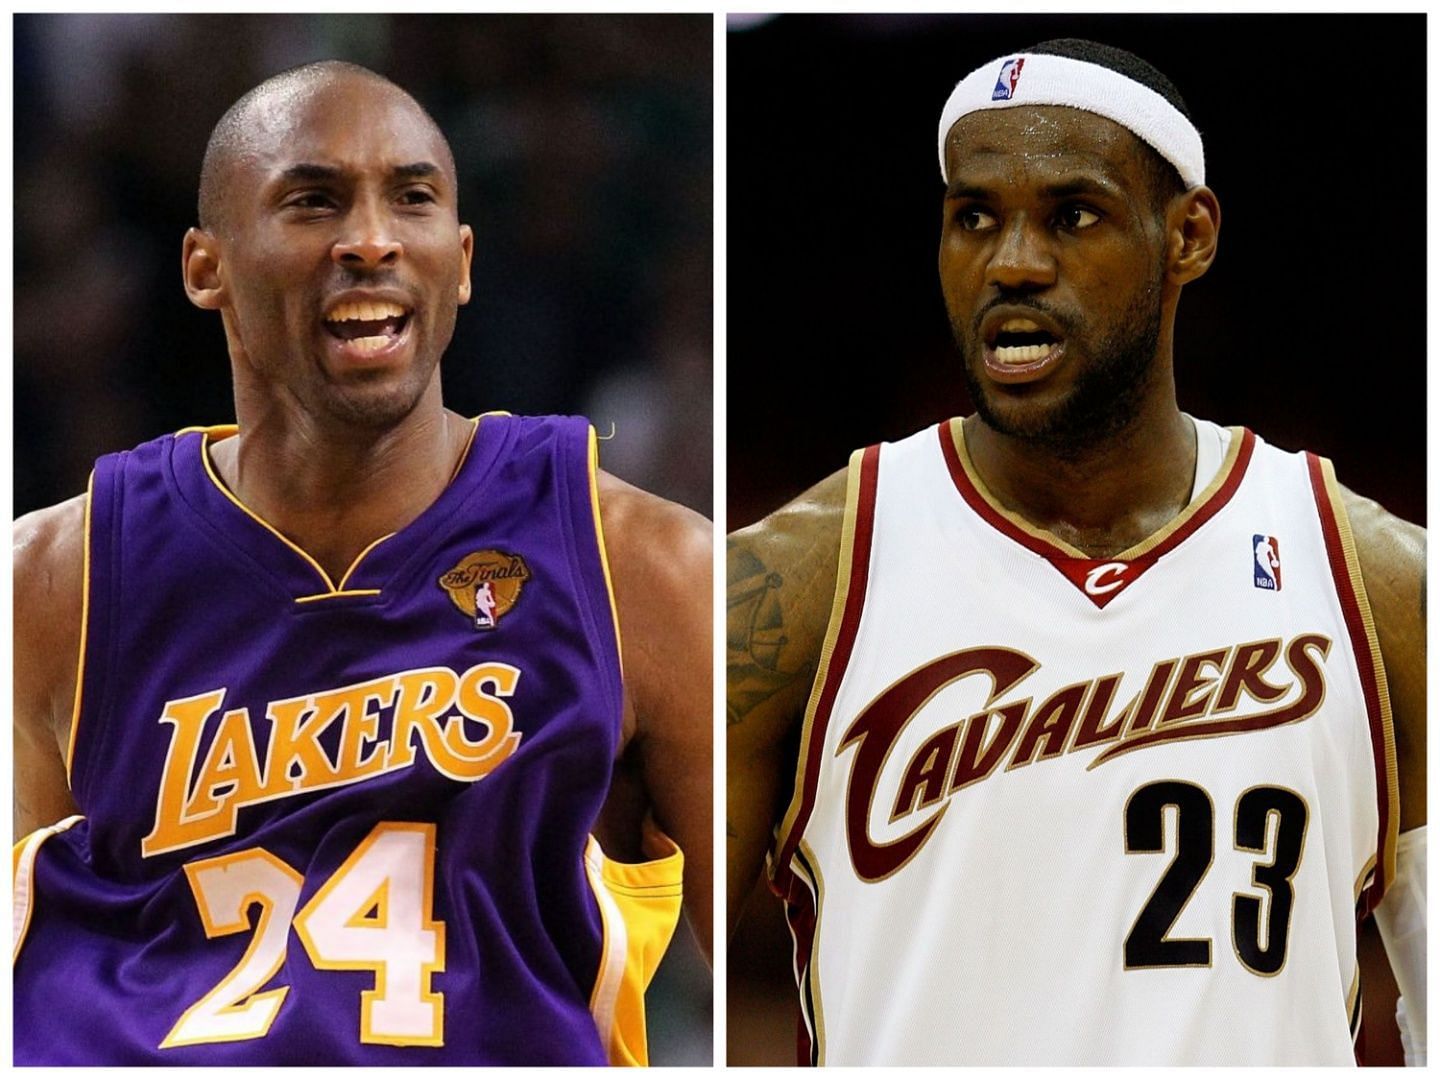 Kobe Bryant and LeBron James never got to face each other in the NBA Finals.